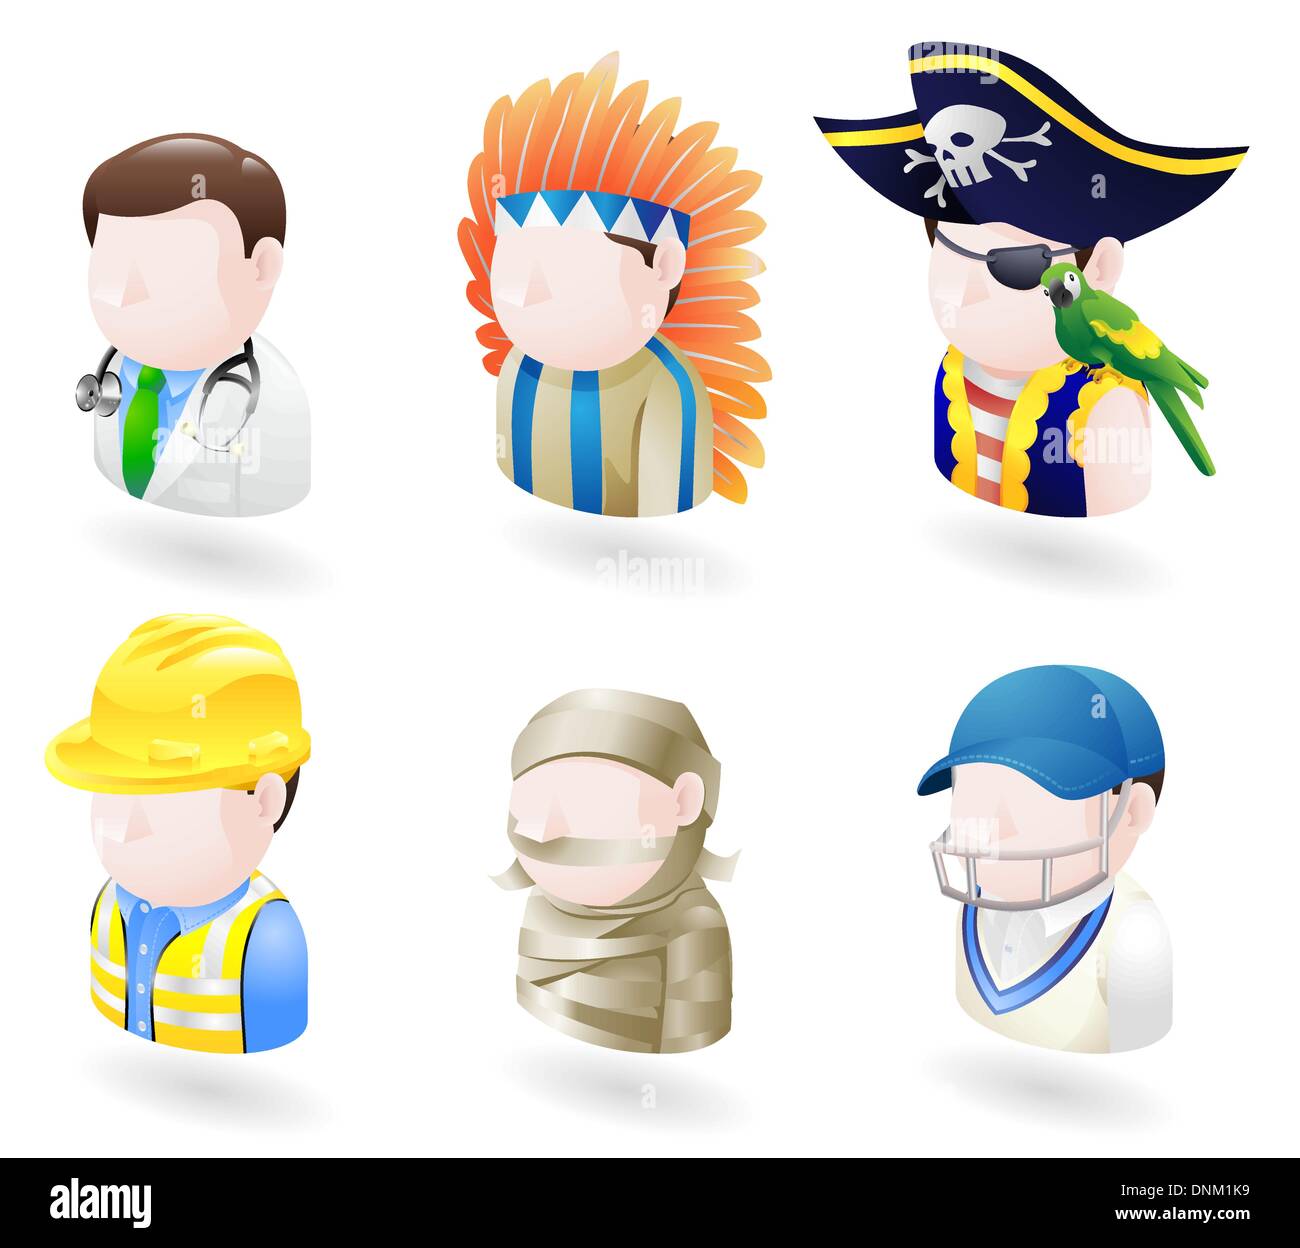 An avatar people web or internet icon set series. Includes a doctor, native American, pirate, builder or construction worker or  Stock Vector